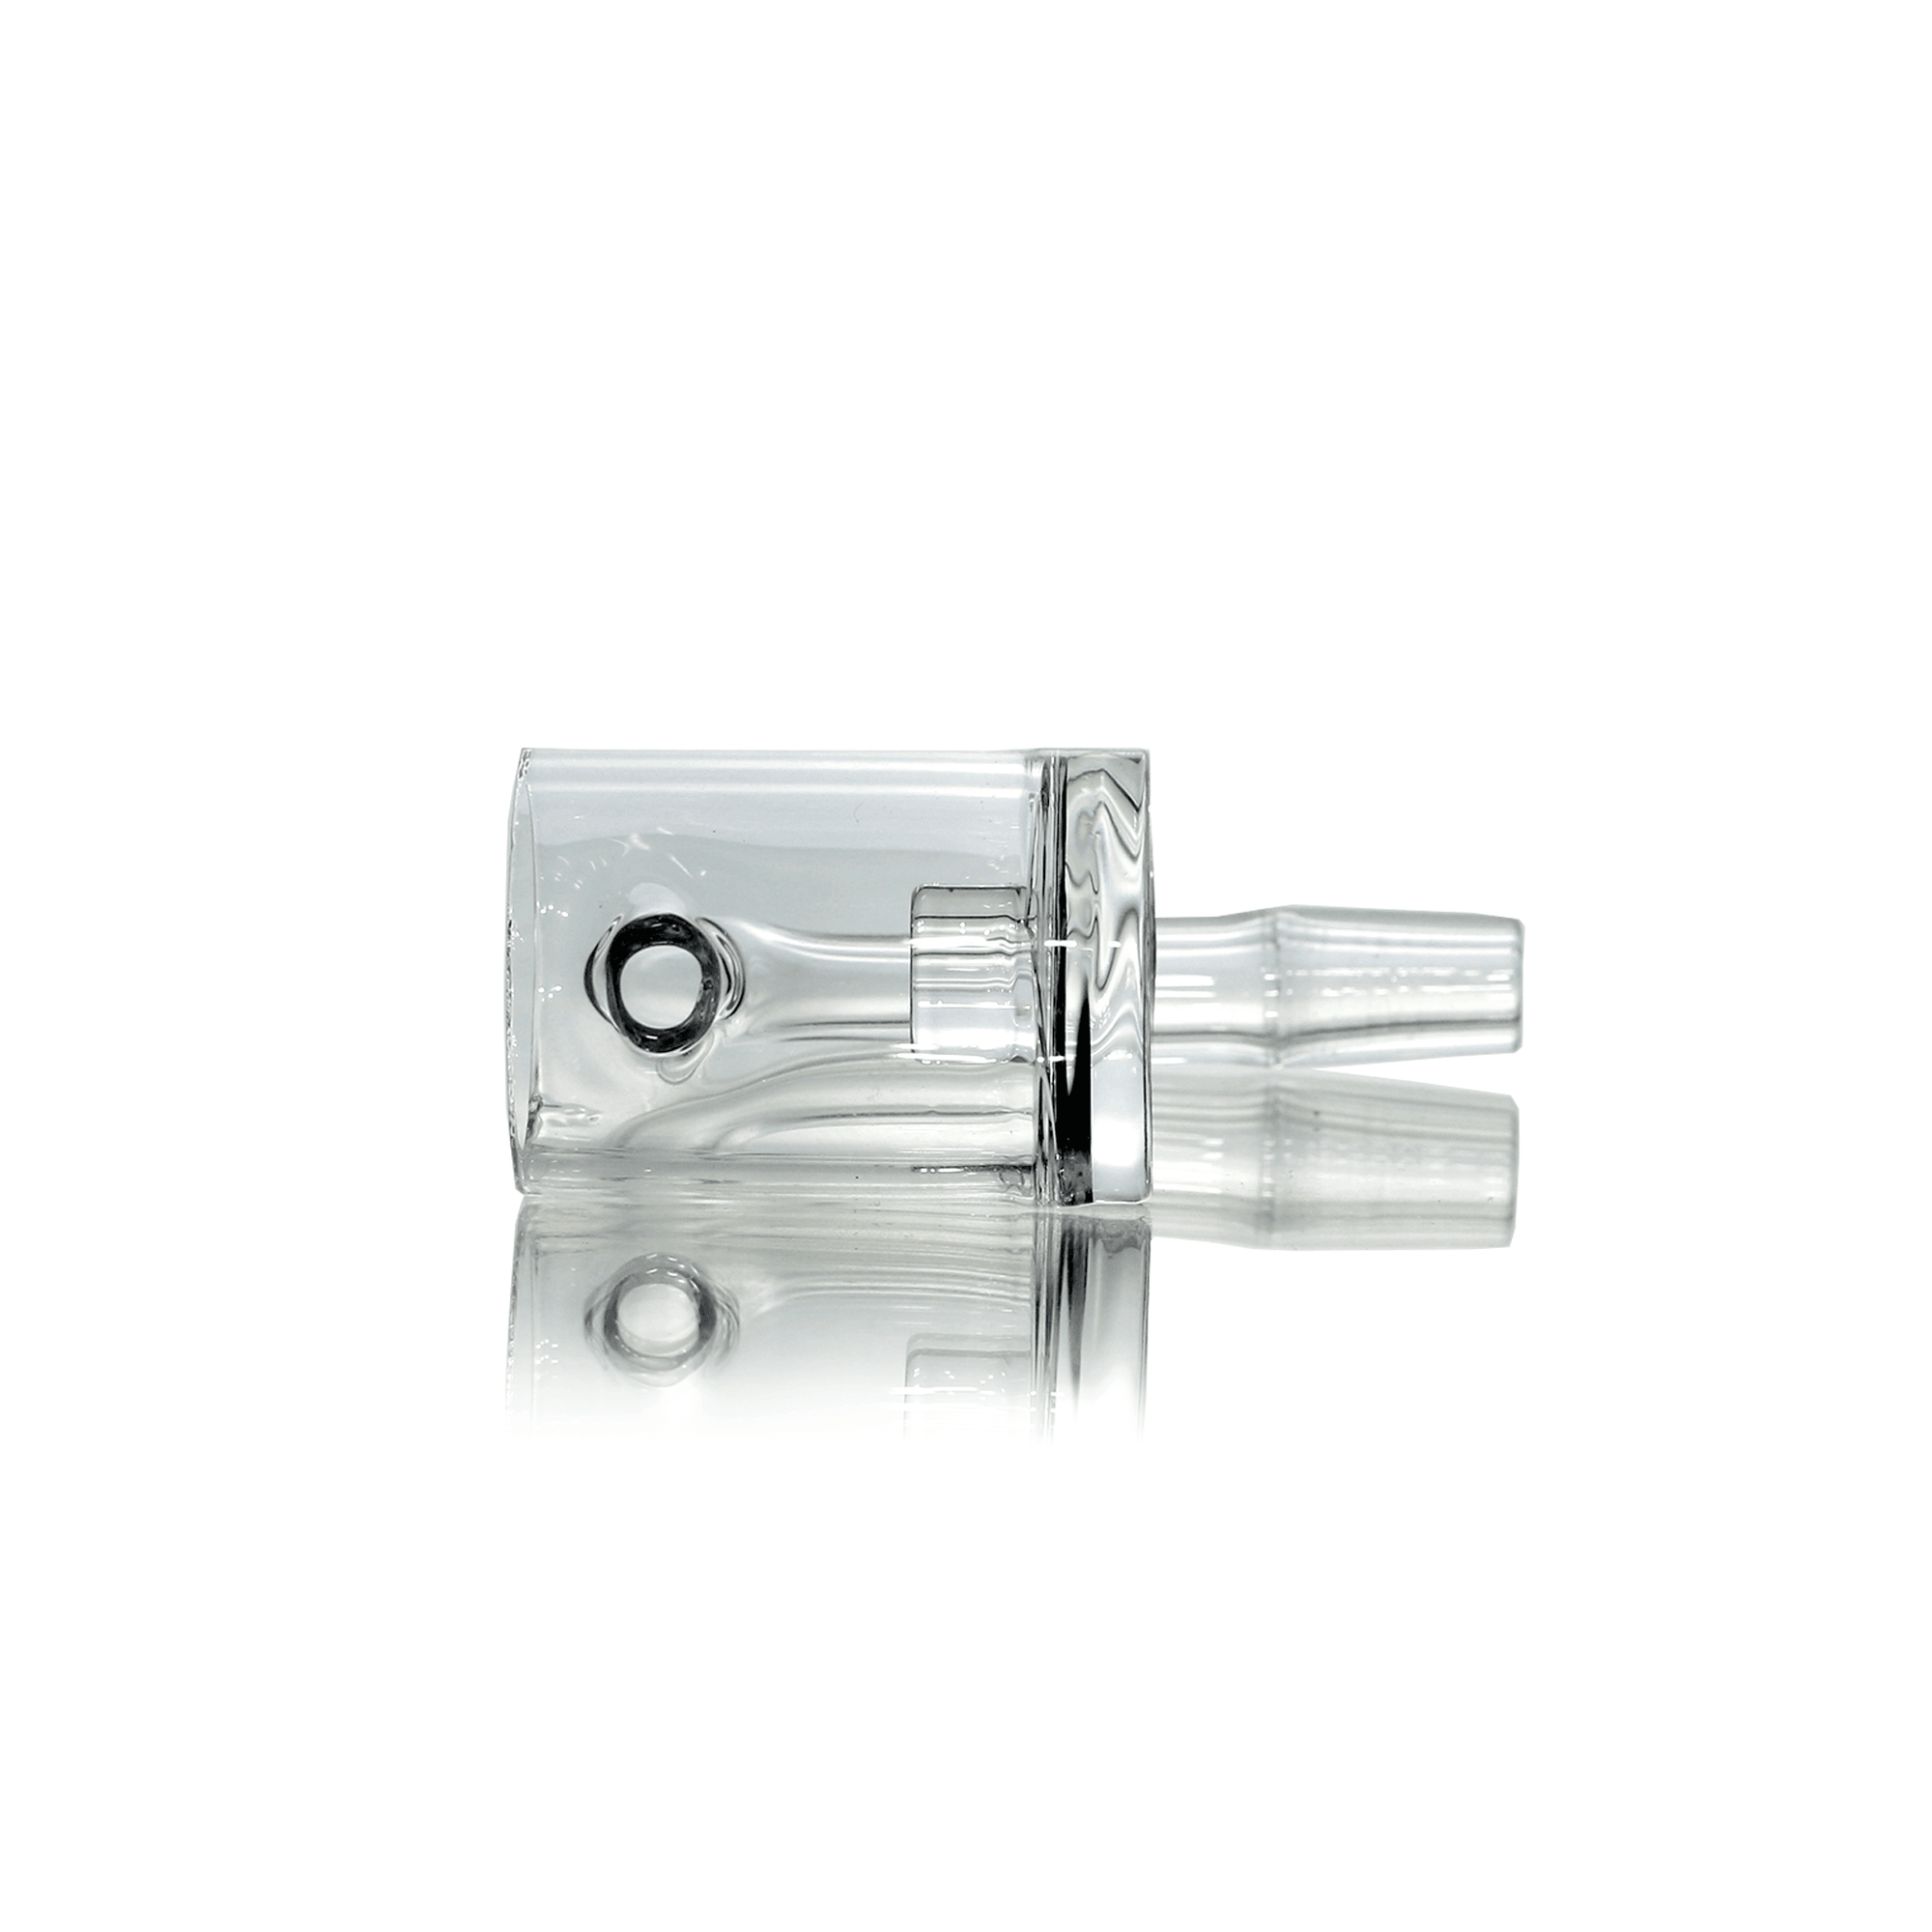 Quartz Banger Core Reactor 10mm Male With Saucer Cap | Banger Side View | the dabbing specialists